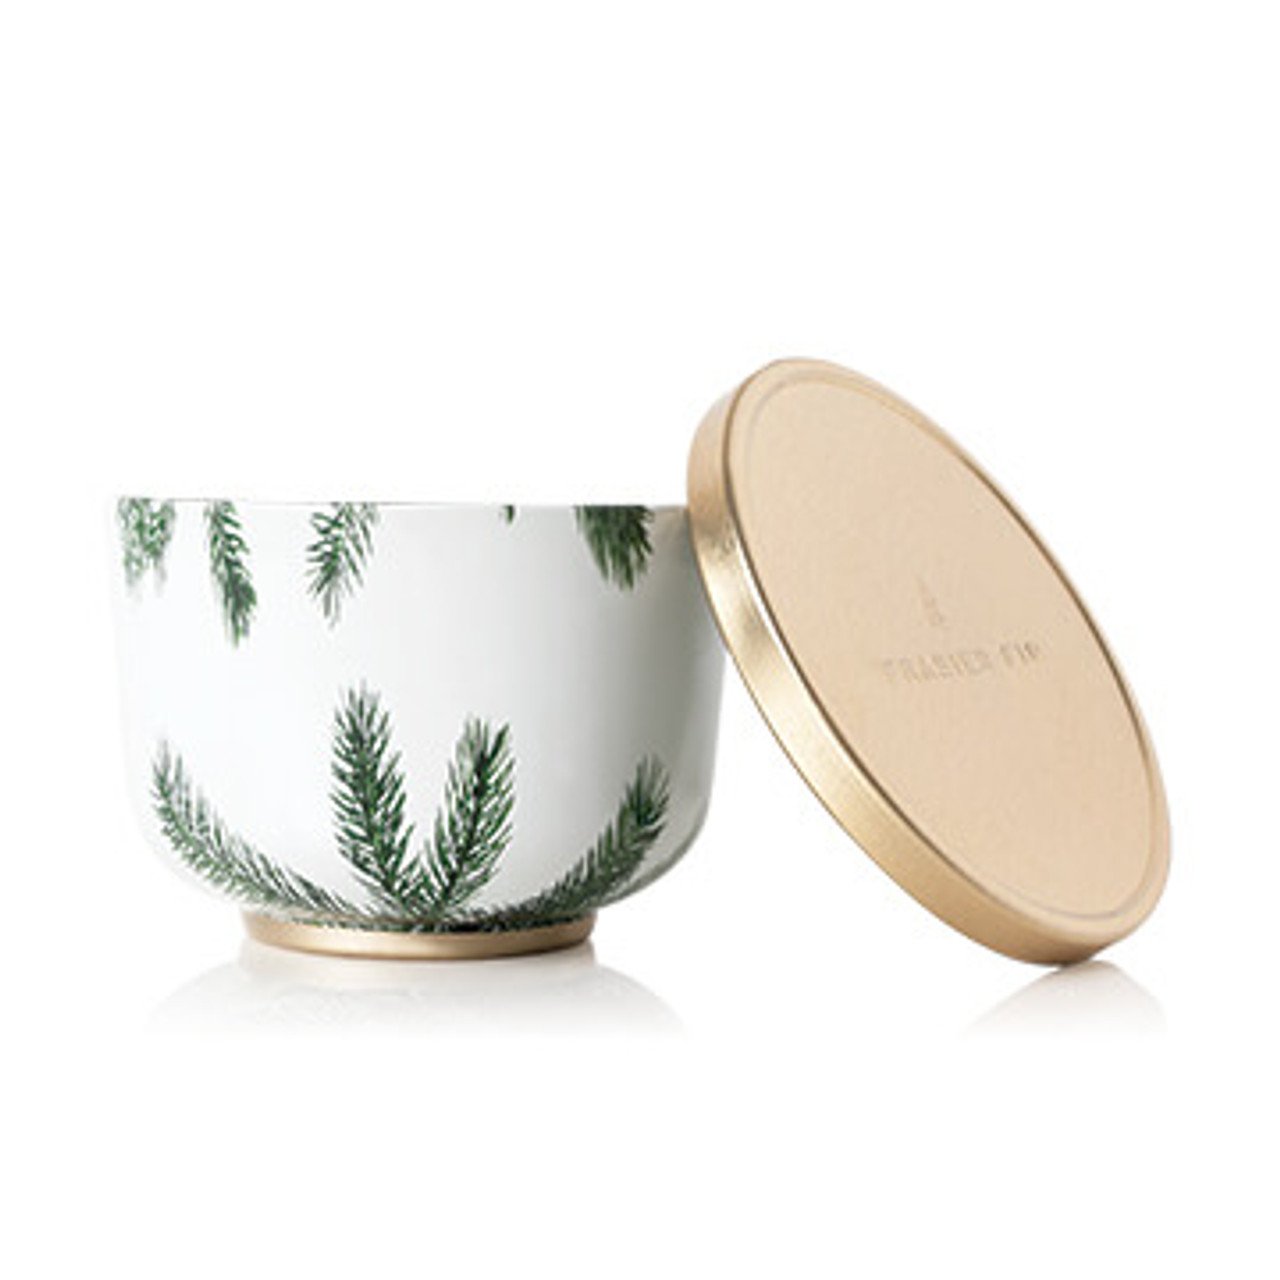 Thymes glass pine needle candle holder gold lid frasier fir